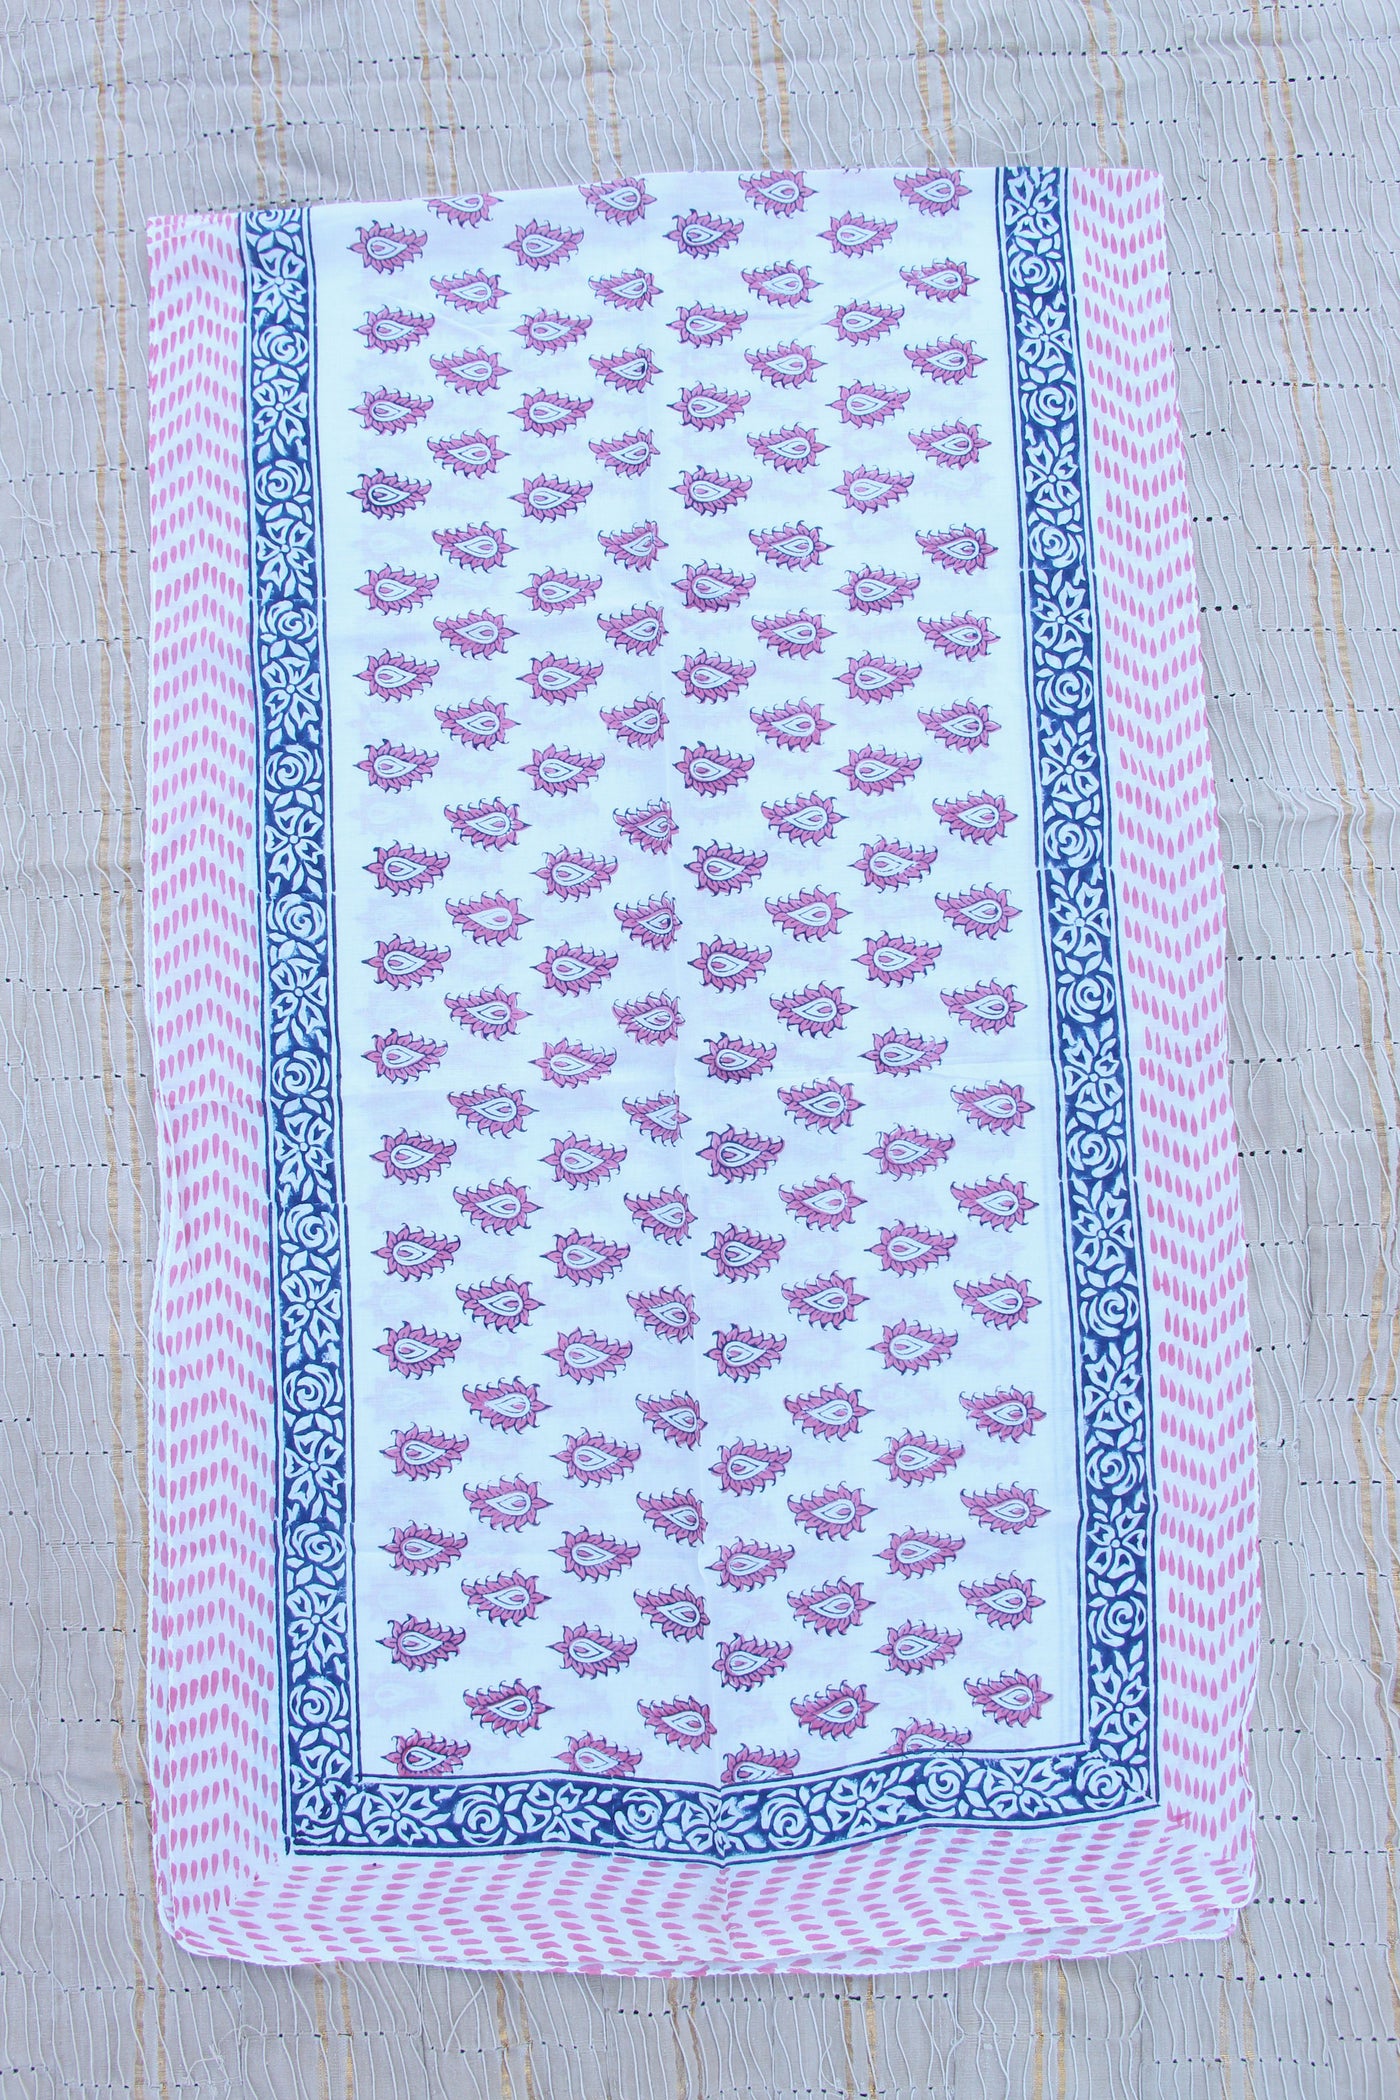 Pink & Navy Paisley Hand Block Print Scarf, Cotton, from India